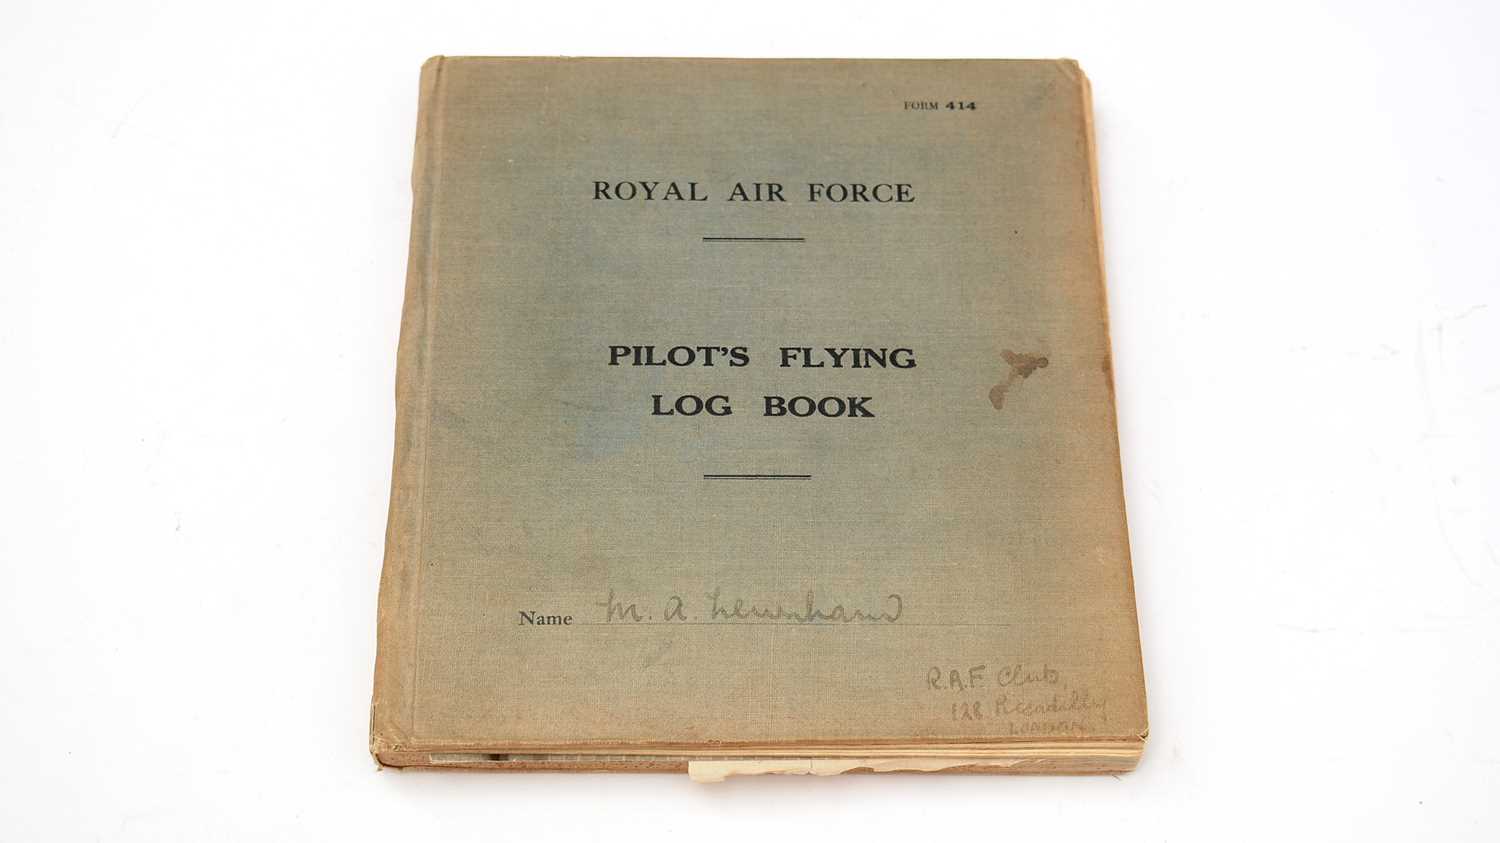 The Second World War Royal Air Force Pilot's Flying Log Book of Group Captain Maurice Ashdown